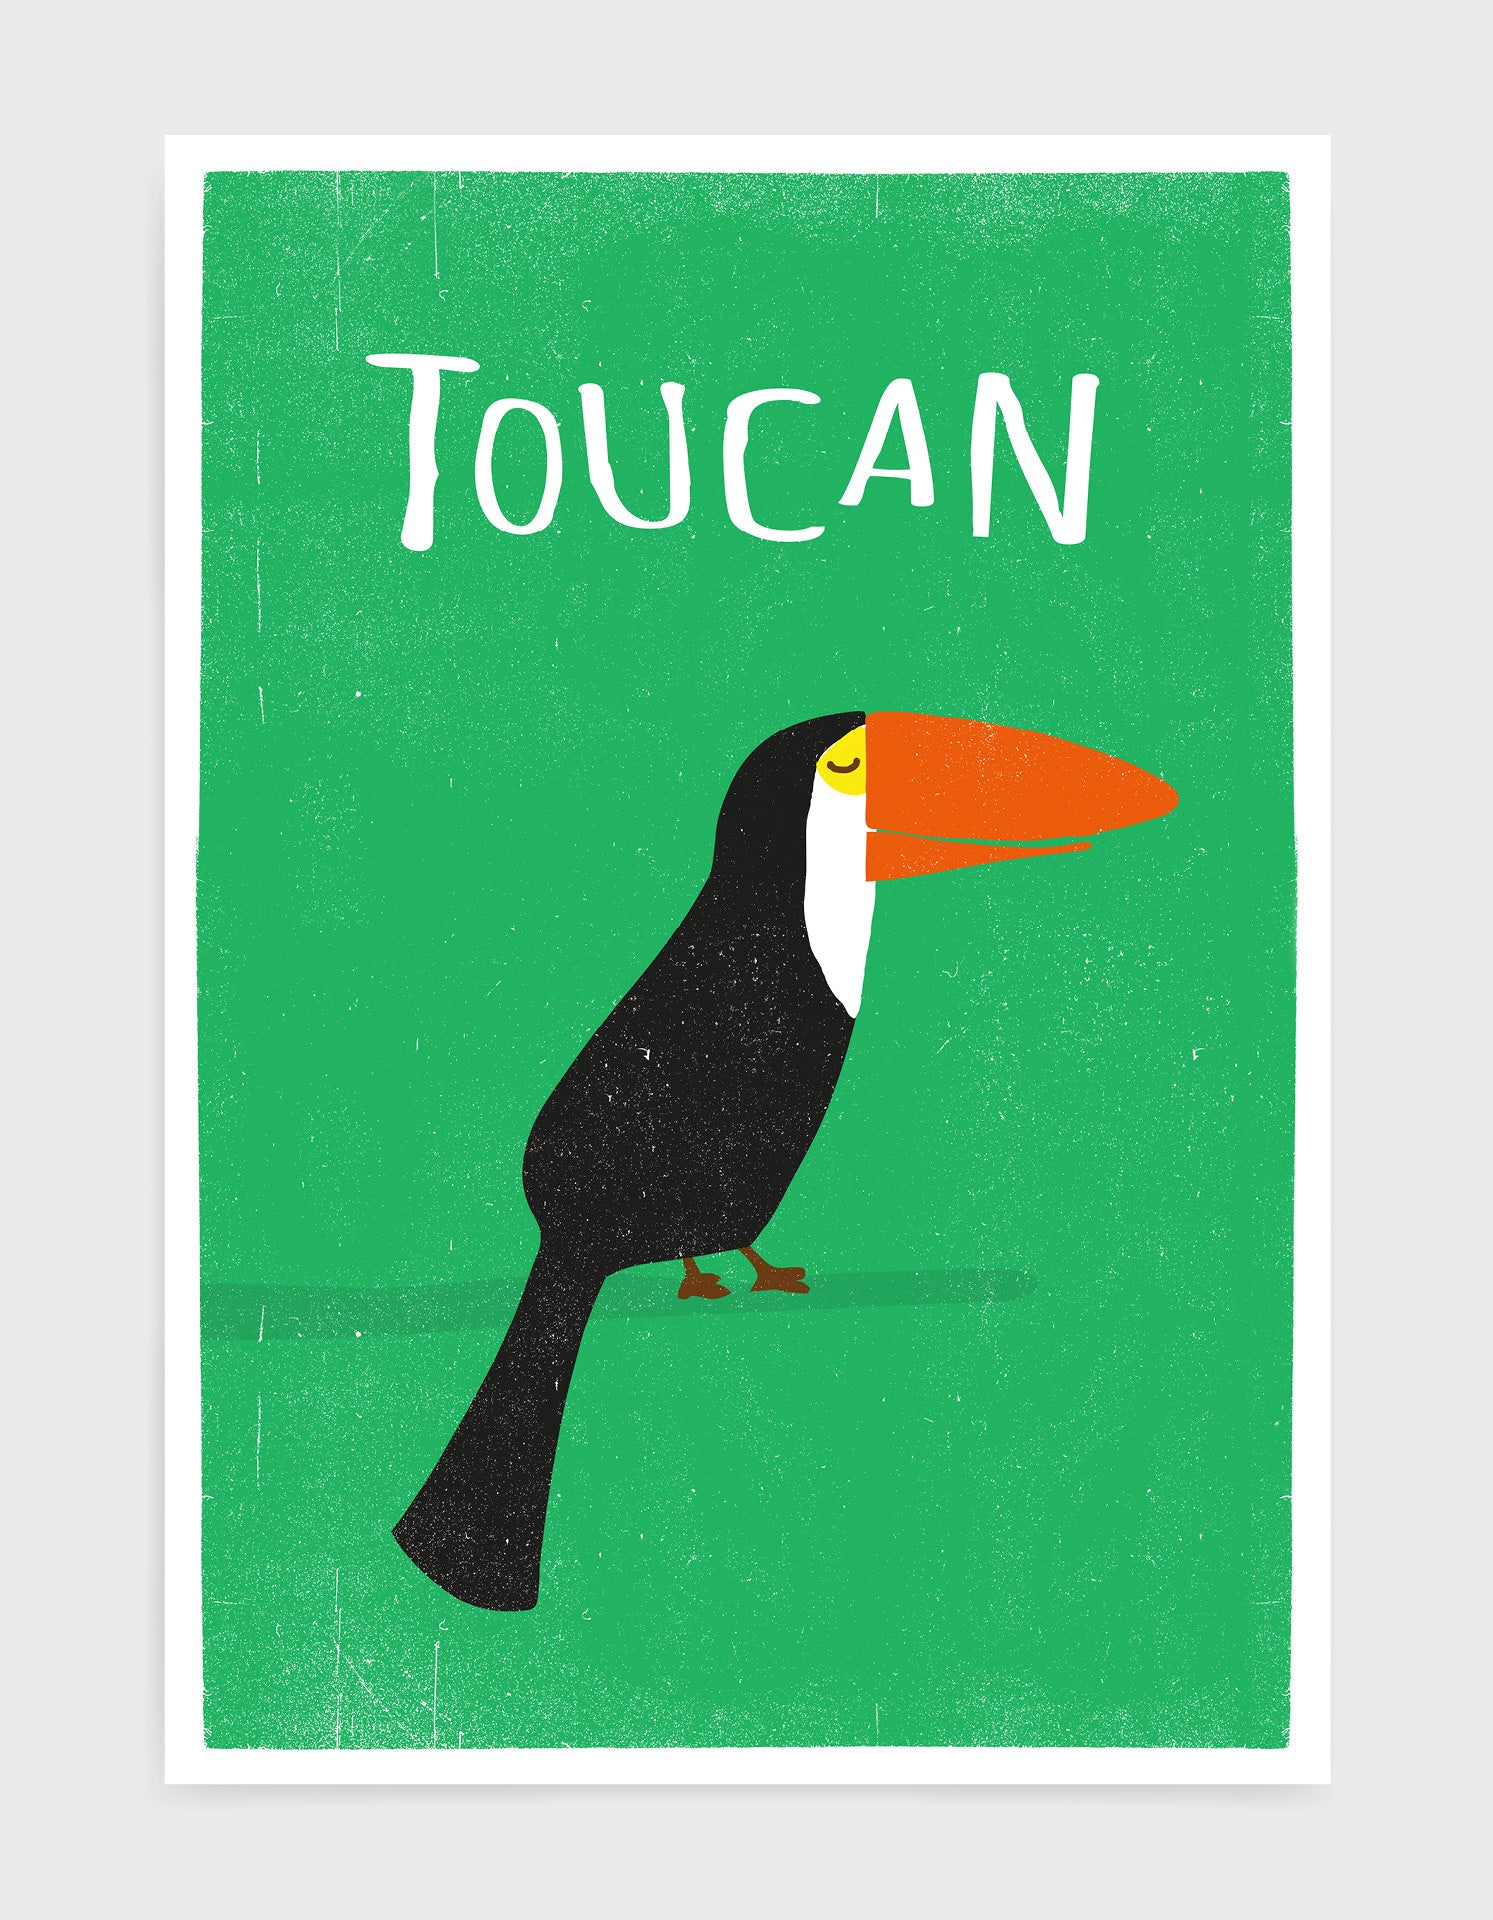 art print of a toucan bird in profile against a green background